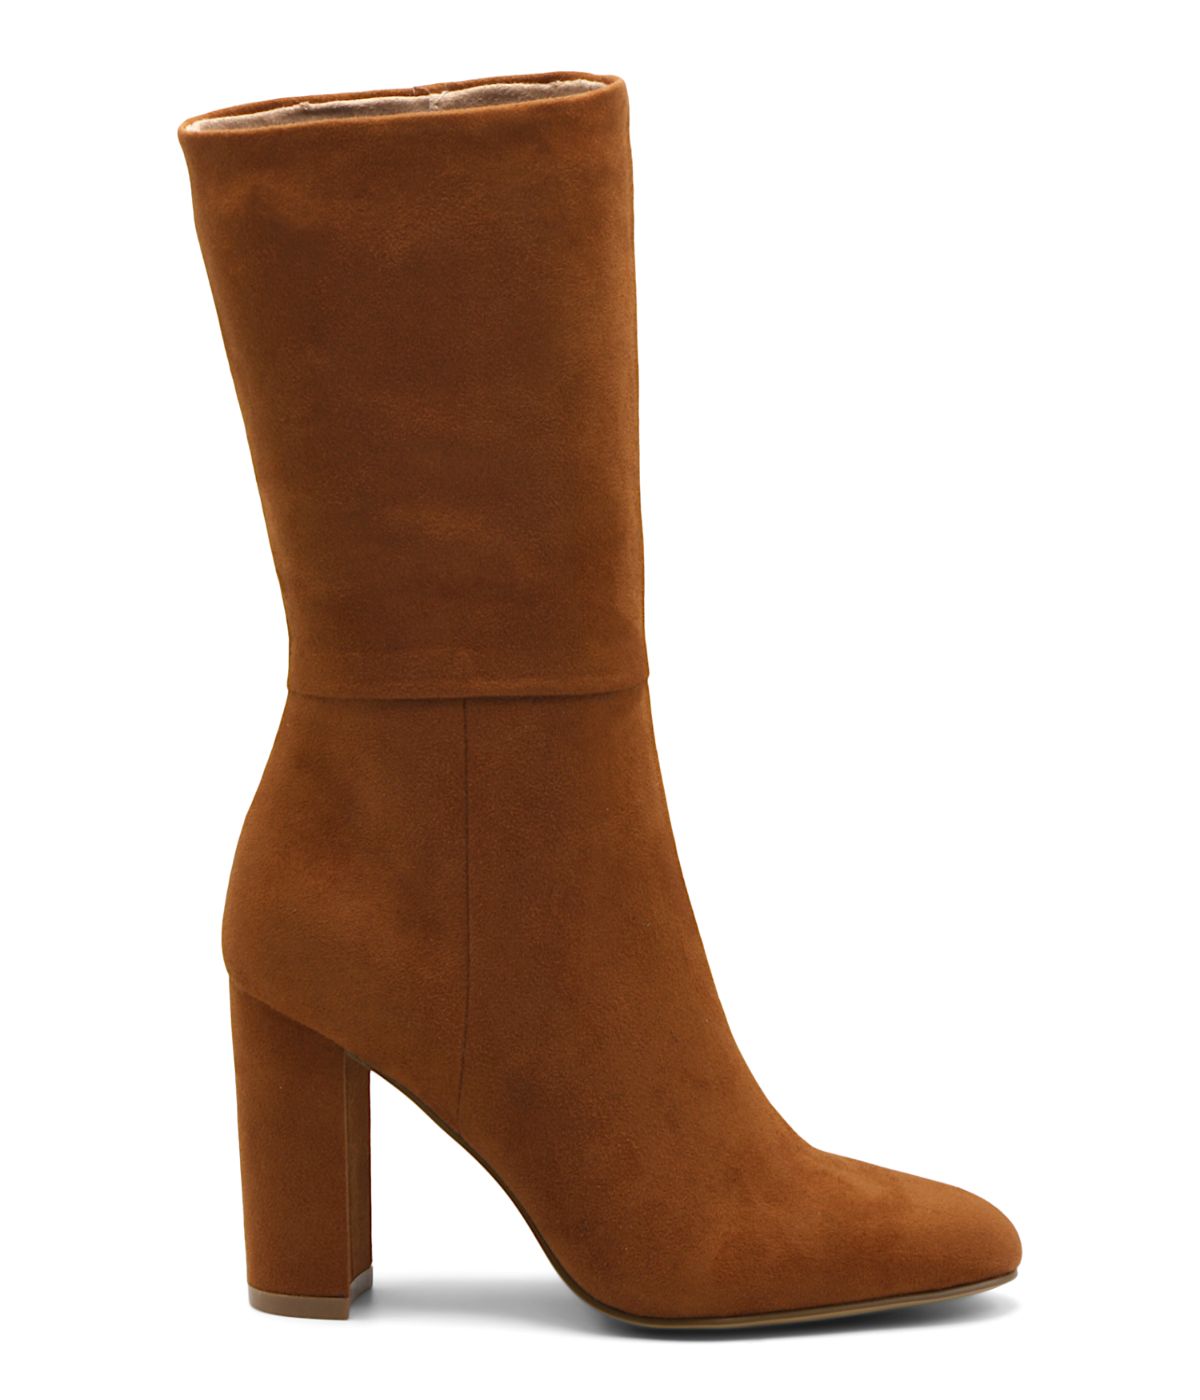 Charles by Charles David Billow Boot Caramelized